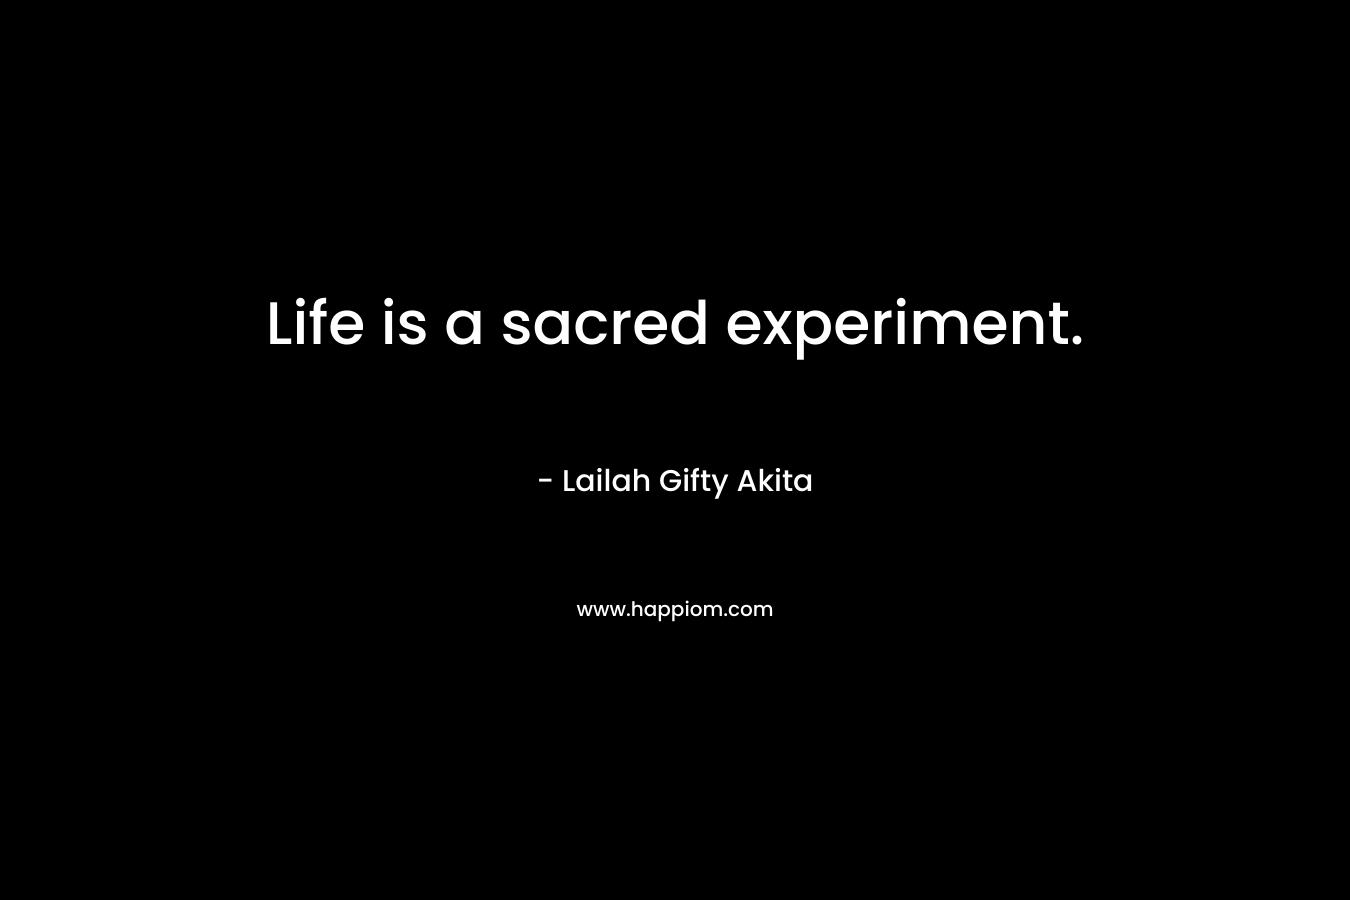 Life is a sacred experiment.